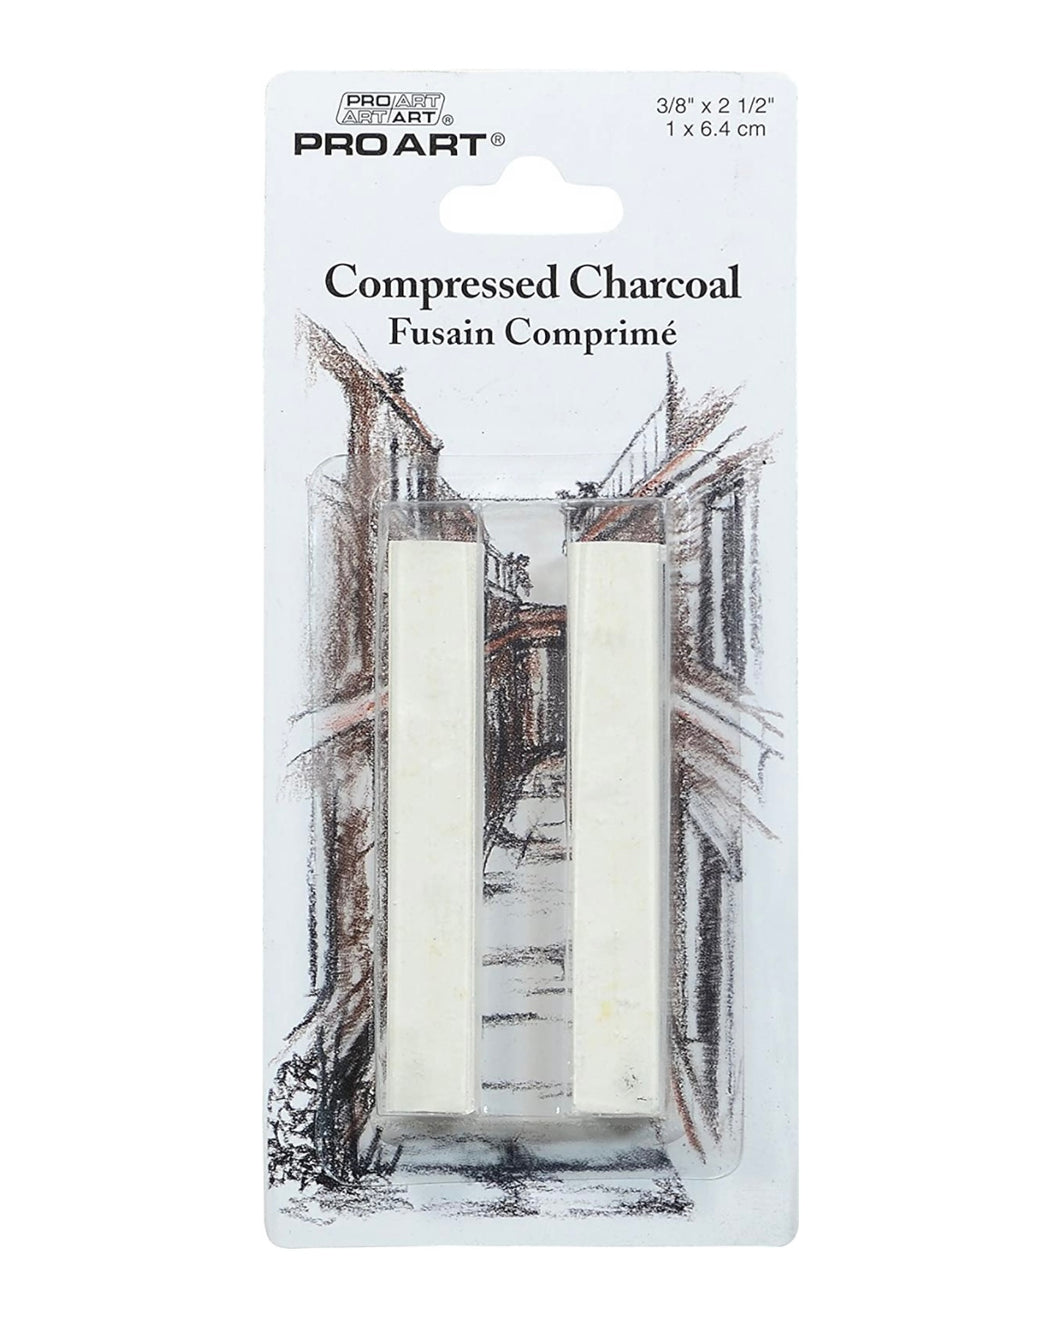 Pro Art Compressed Charcoal White 2 PC